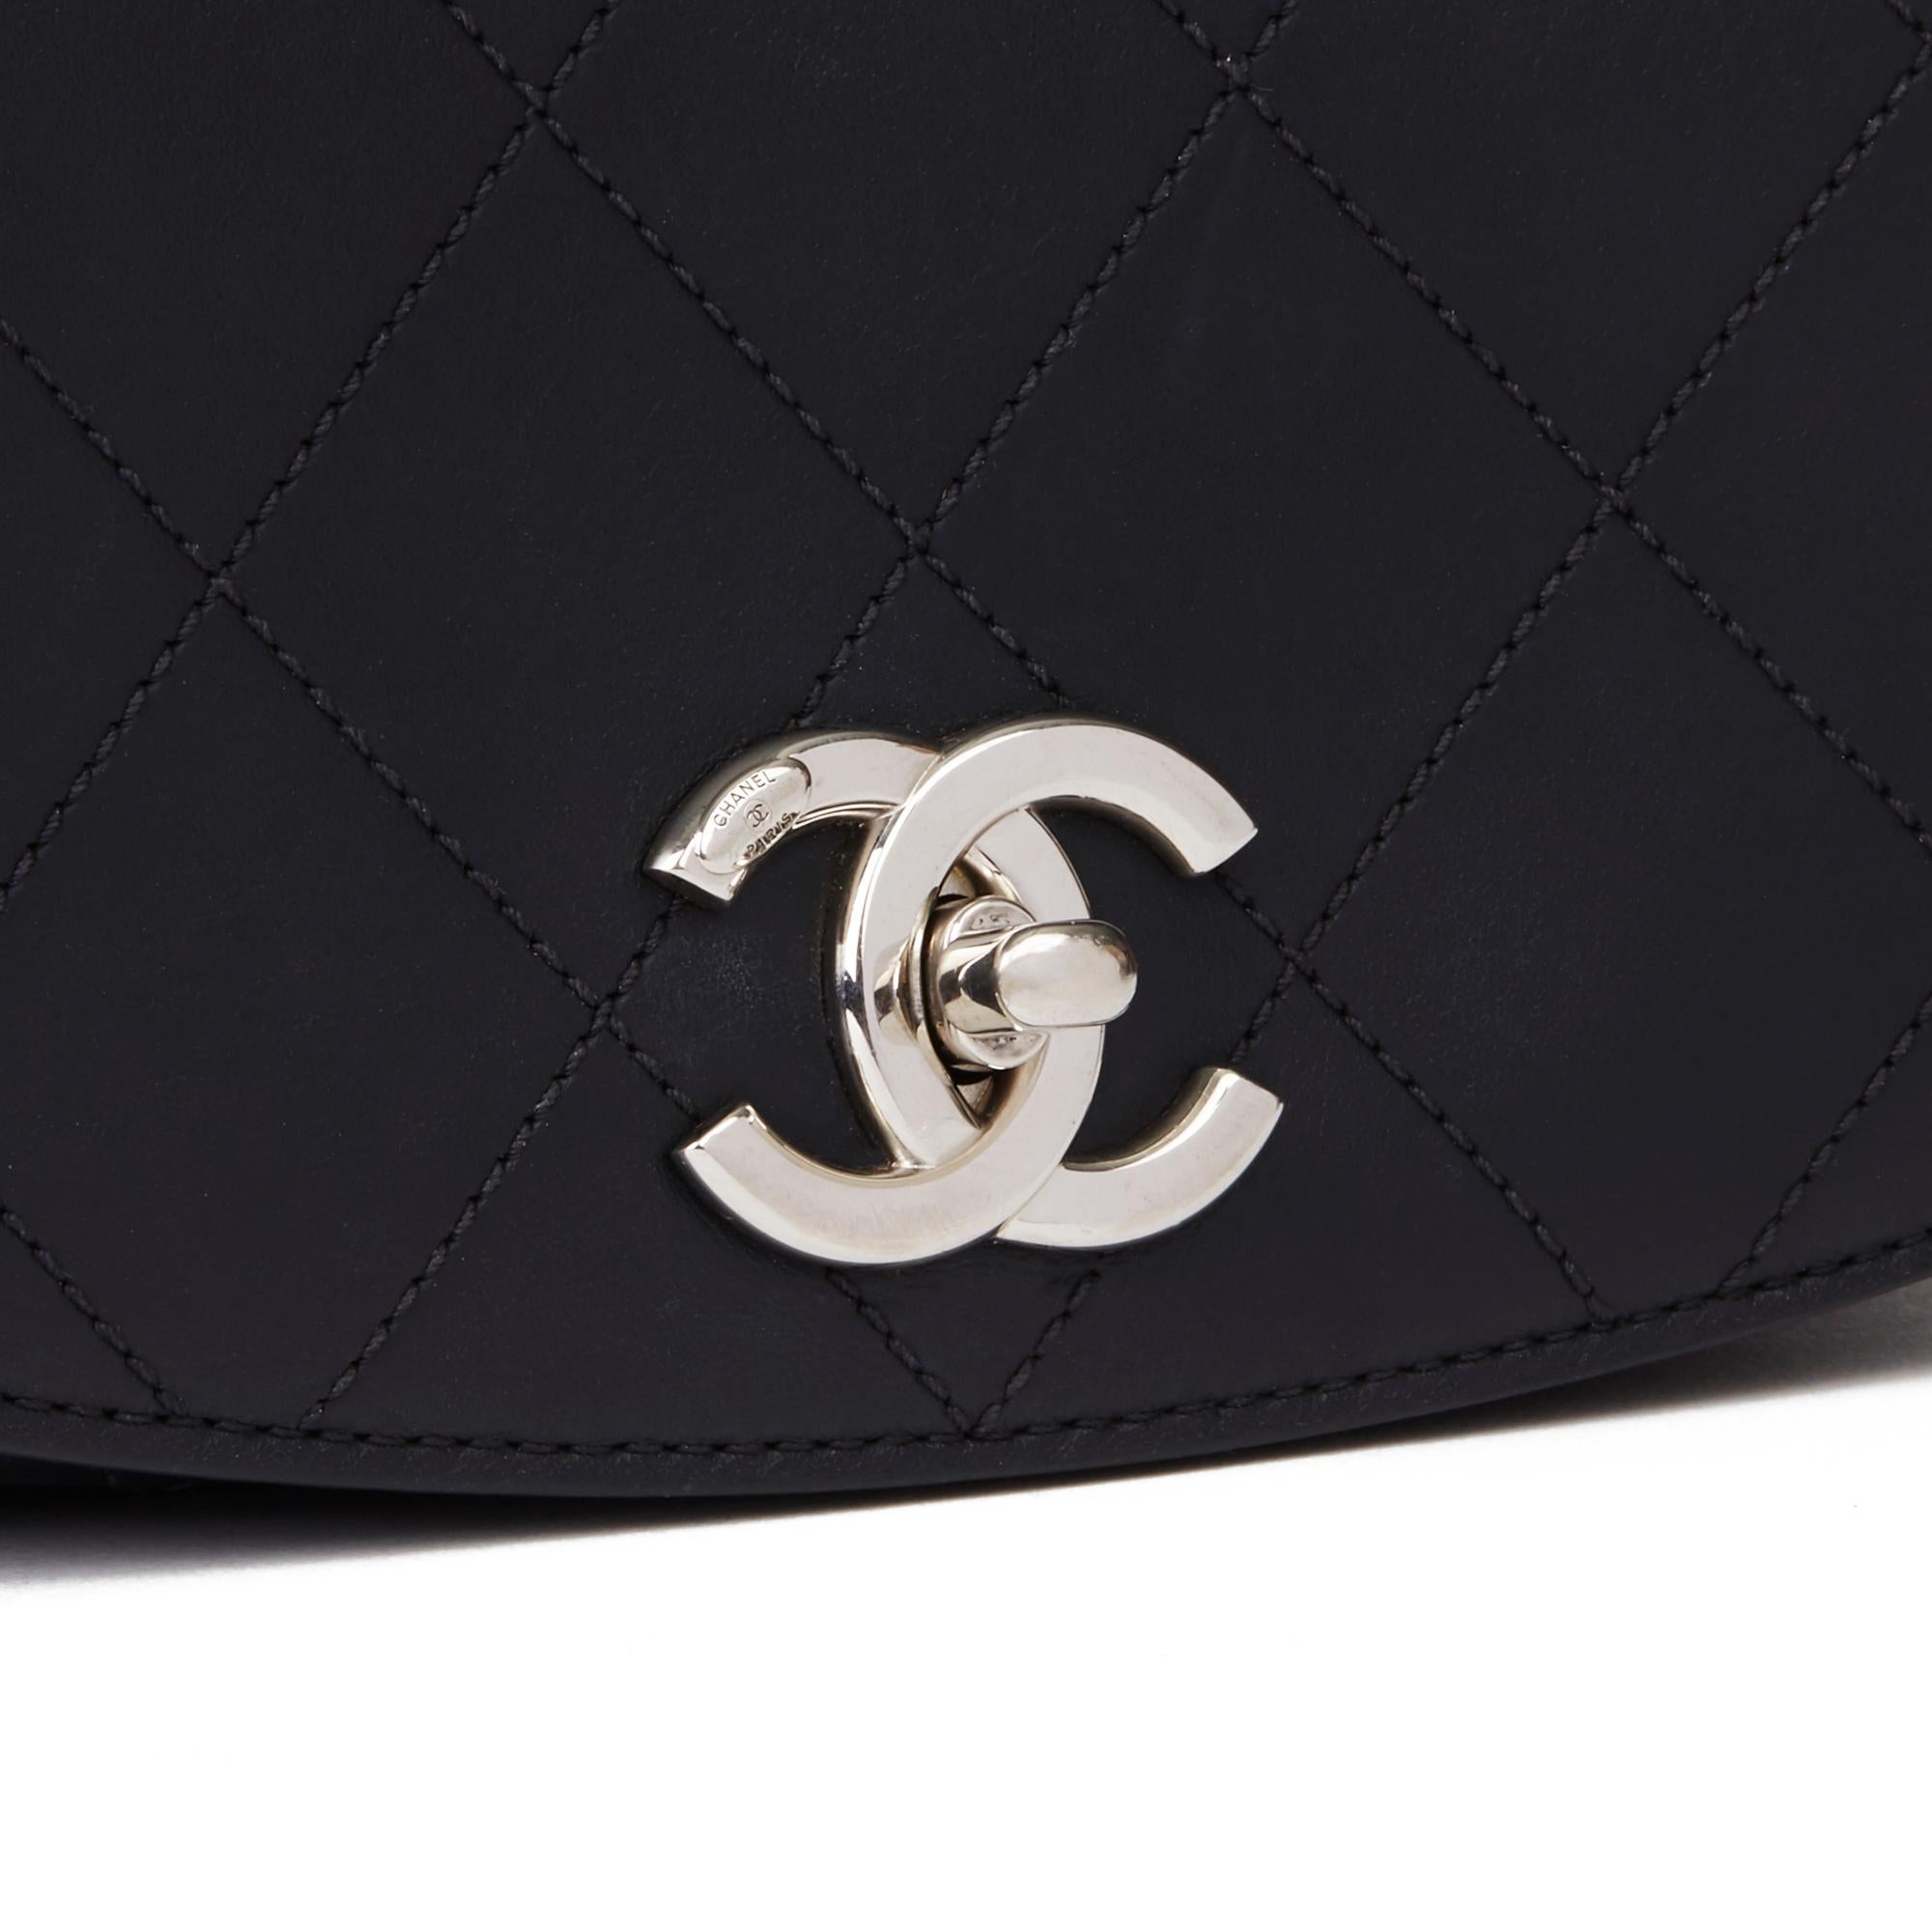 2017 Chanel Black Quilted Calfskin Leather Ring My Bag Flap Bag In Excellent Condition In Bishop's Stortford, Hertfordshire